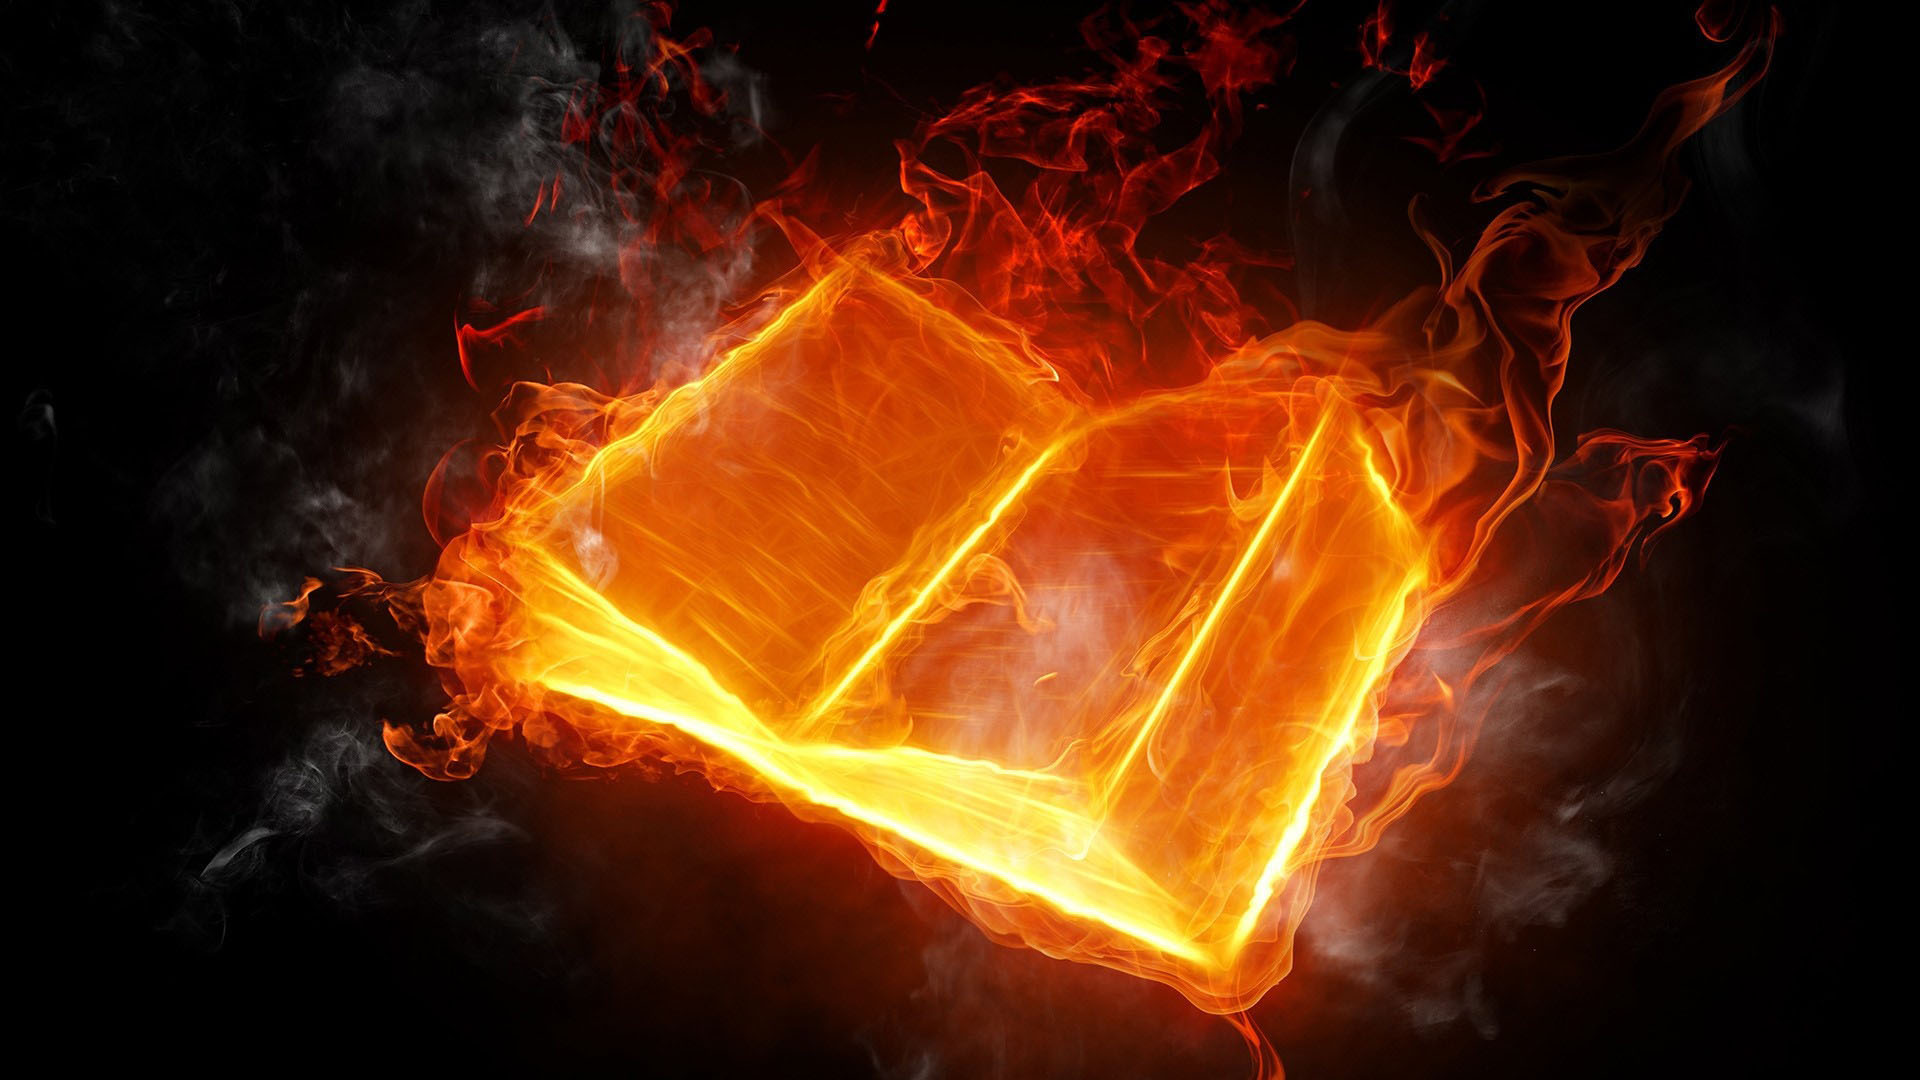 Abstract Fire Book Wallpaper Pictures In High Definition Or